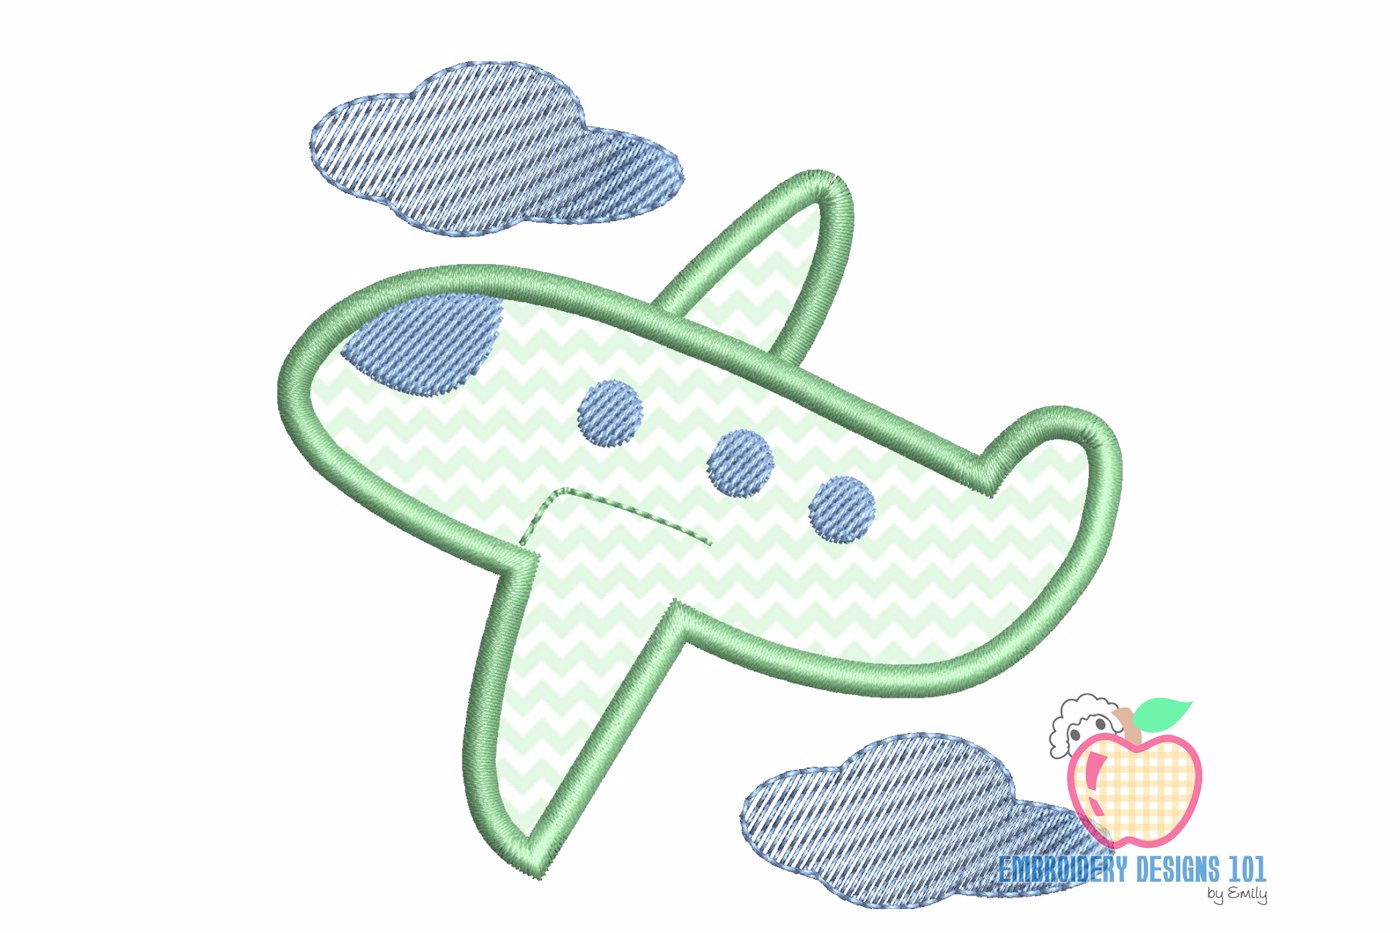 Airplane In Air Embroidery Applique Pattern